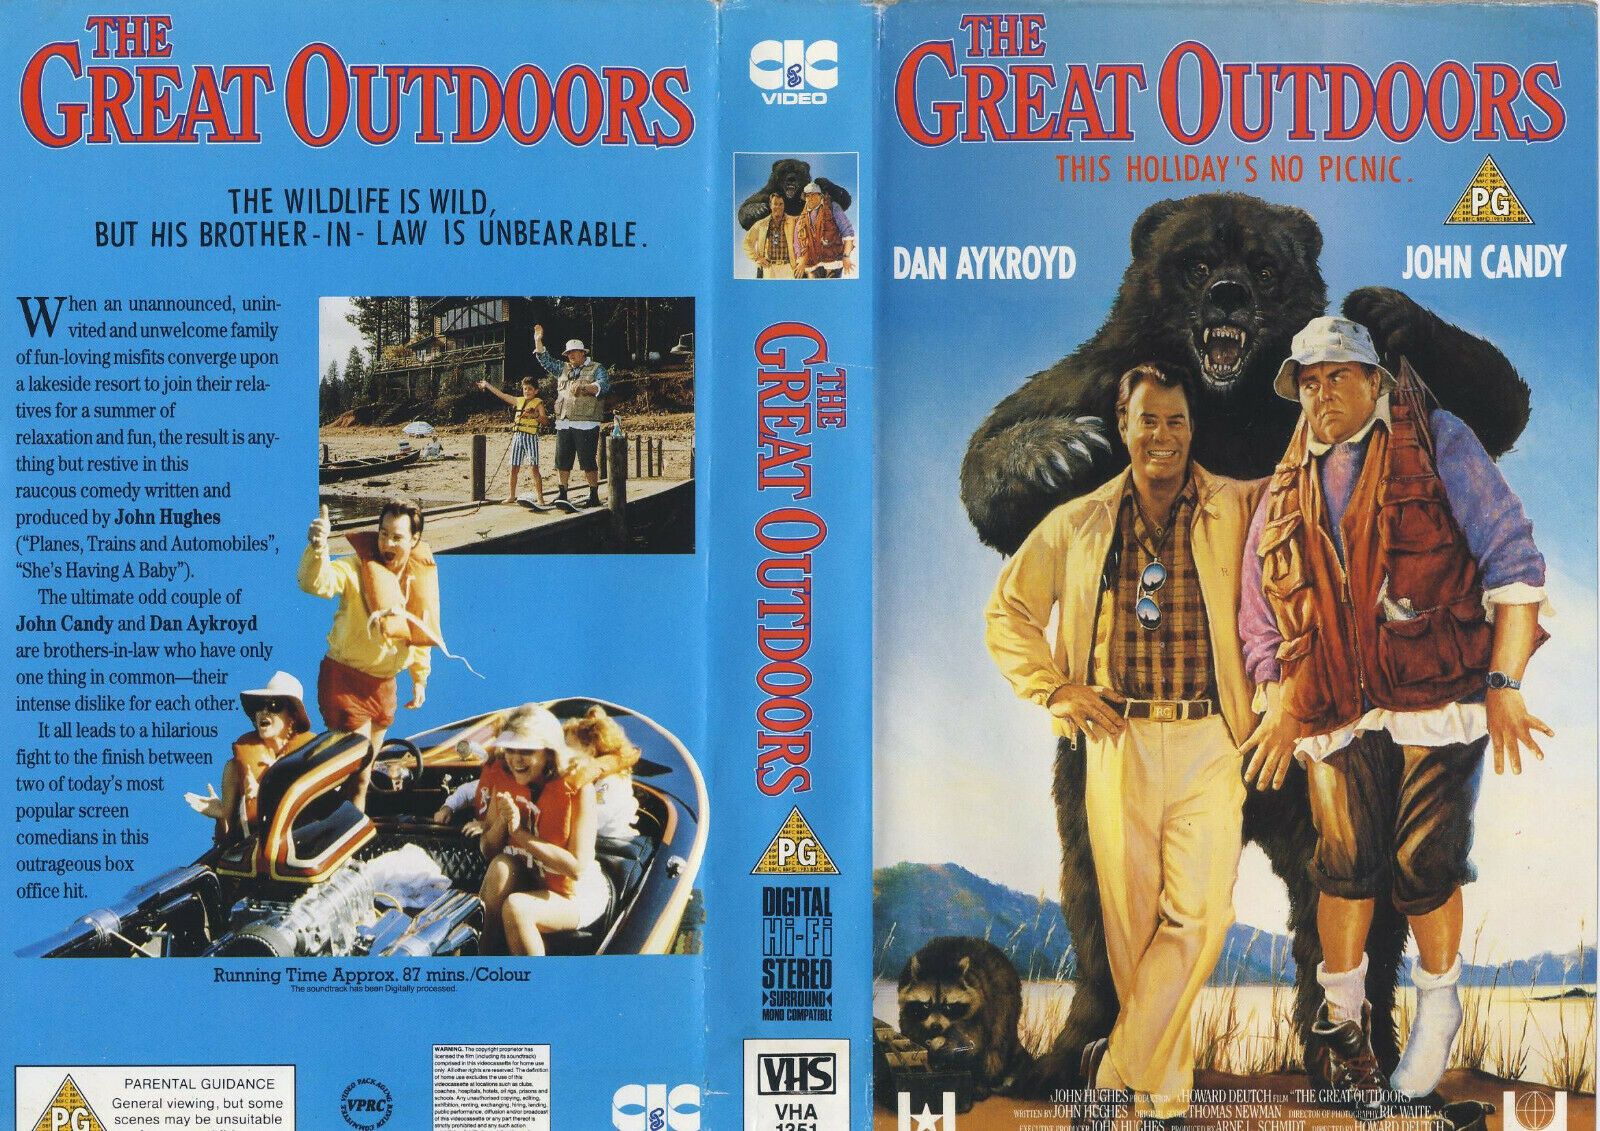 the great outdoors movie poster